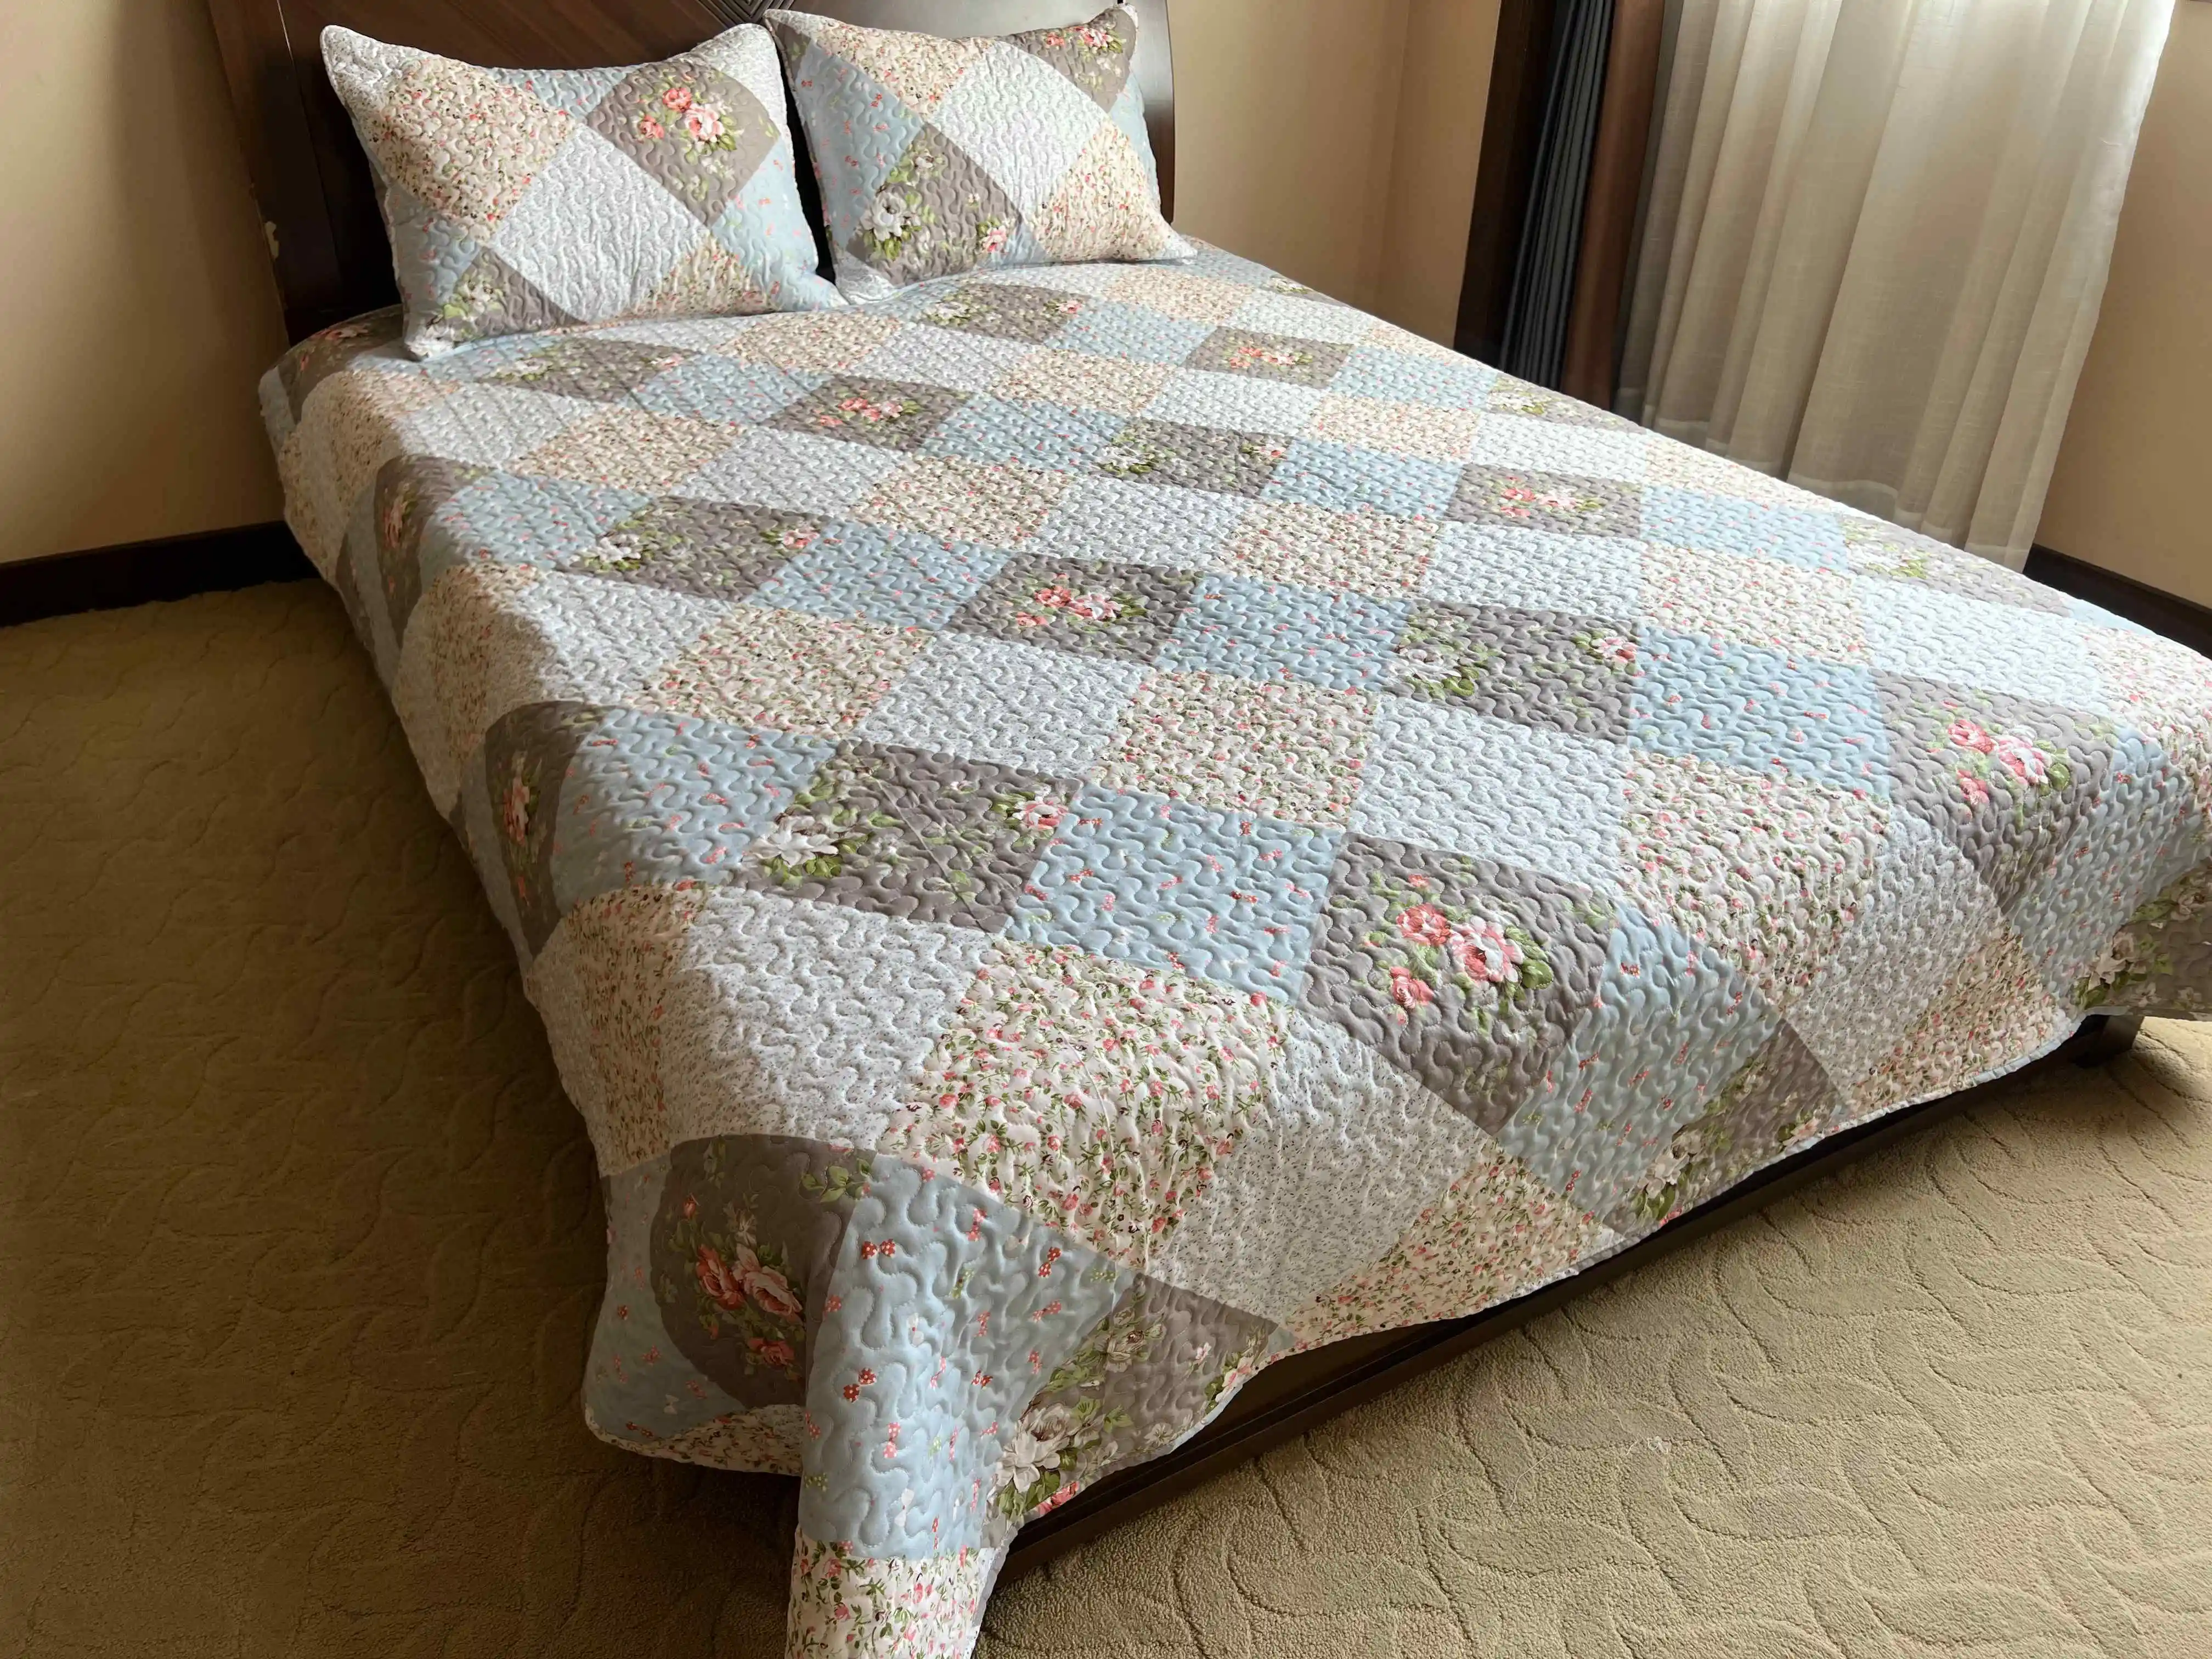 Best-selling Colorful Sewing Patched Thin Quilt printing Bedspread Set